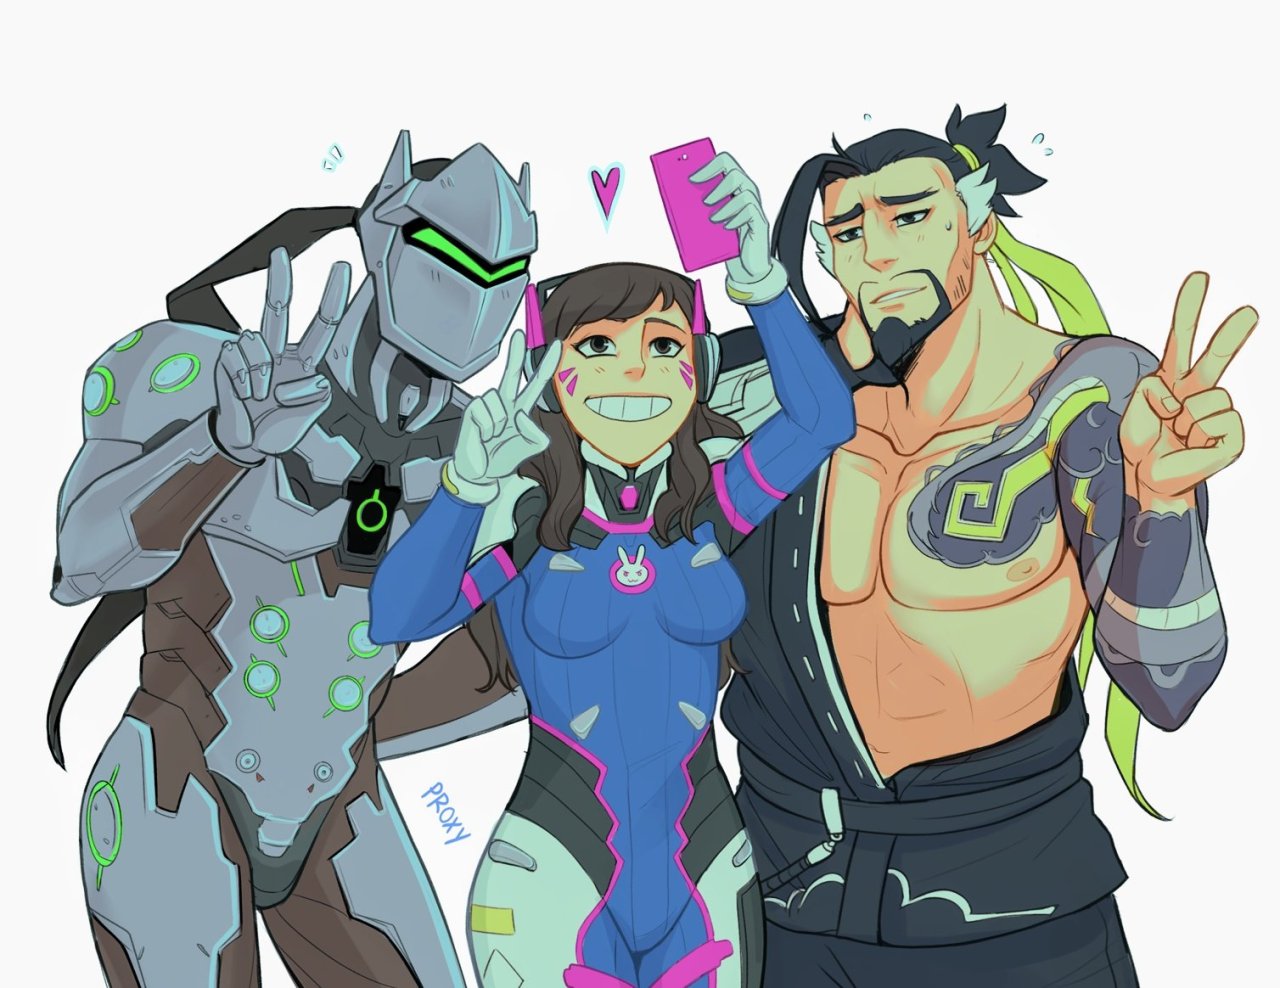 Russia Blocks Overwatch Comic Over Gay Character